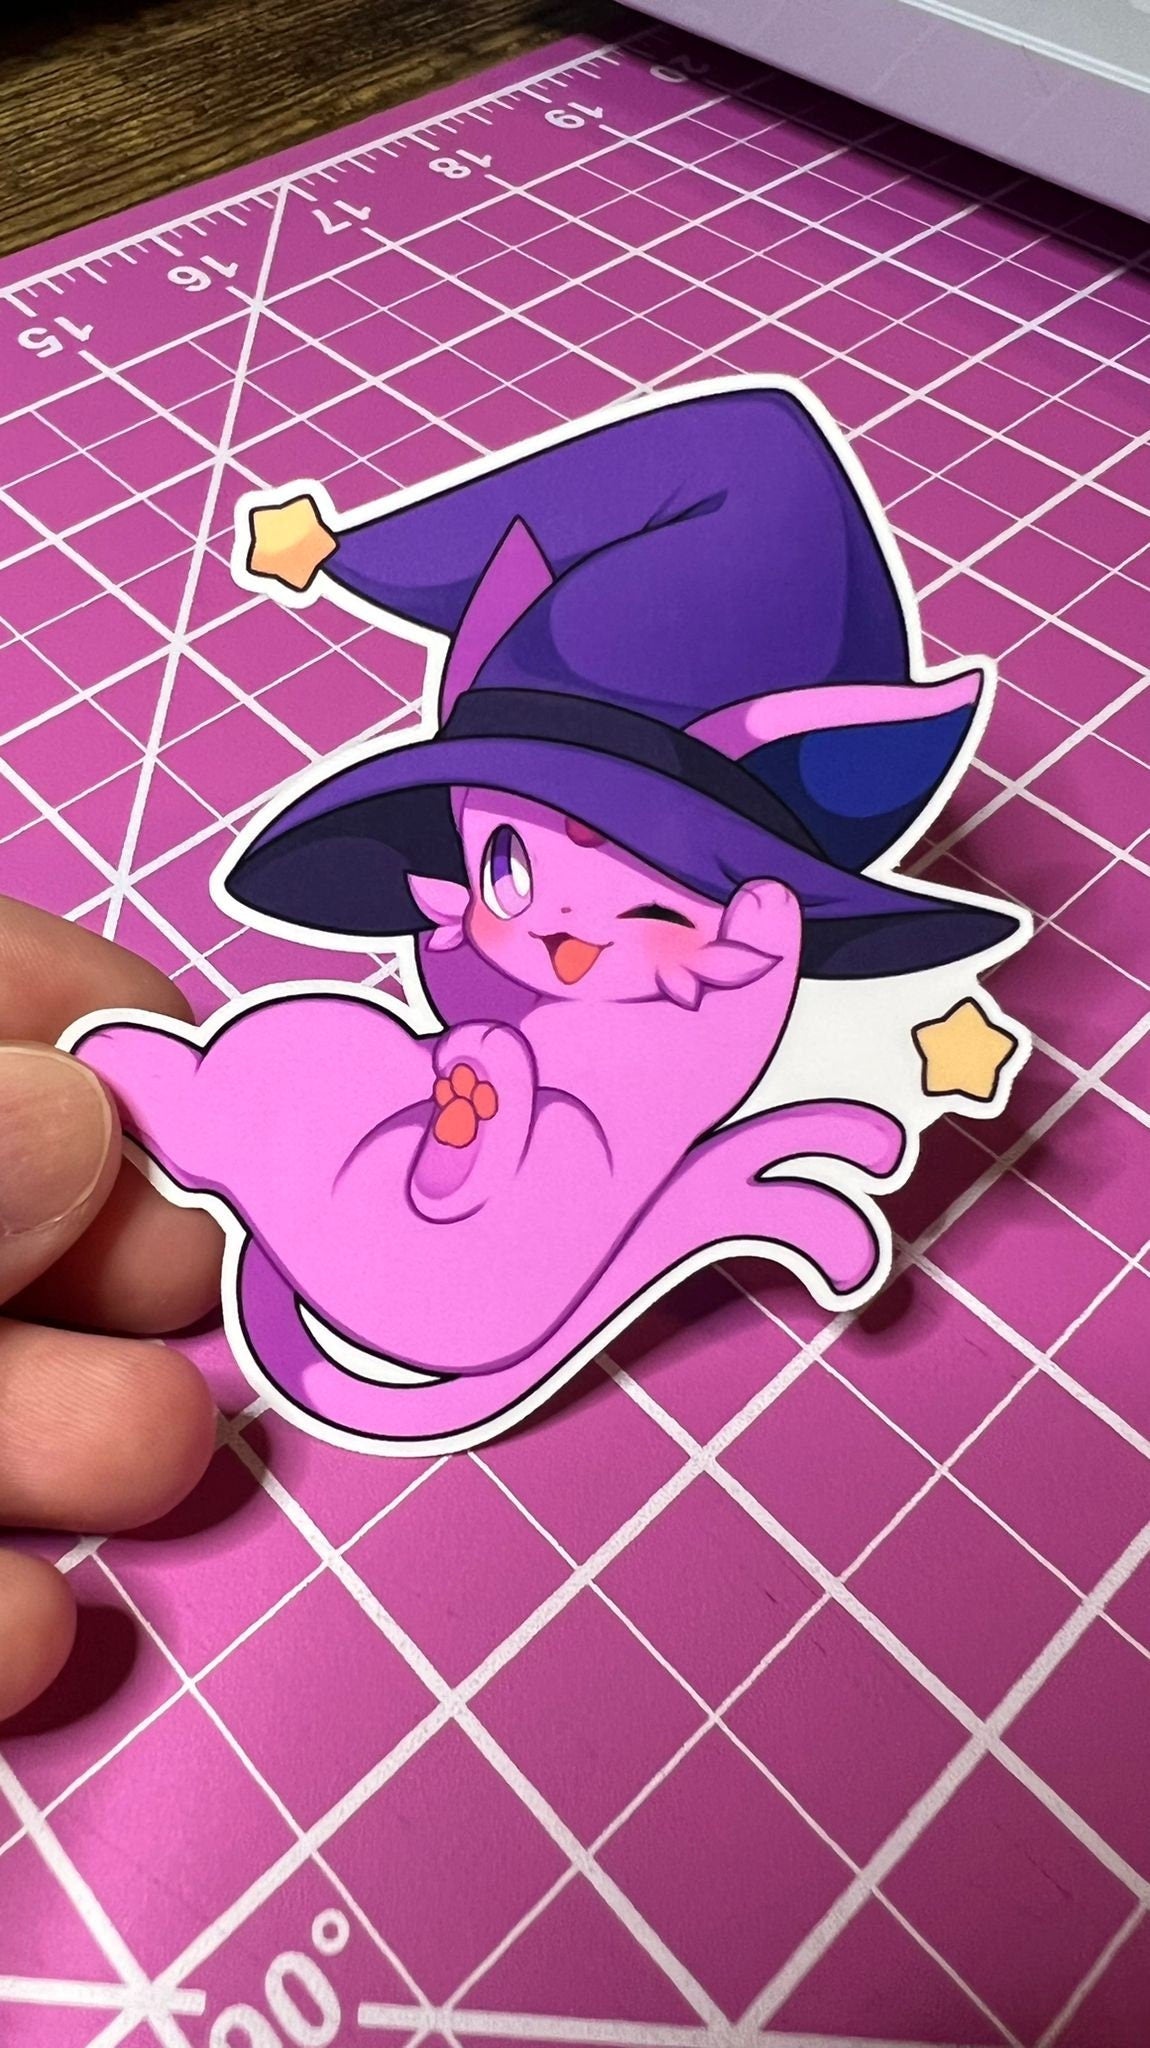 Witch Hat Umbreon and Espeon - Eeveelutions Pokemon Sticker - Great for Bottles, Calendars, Notebooks, Folders!